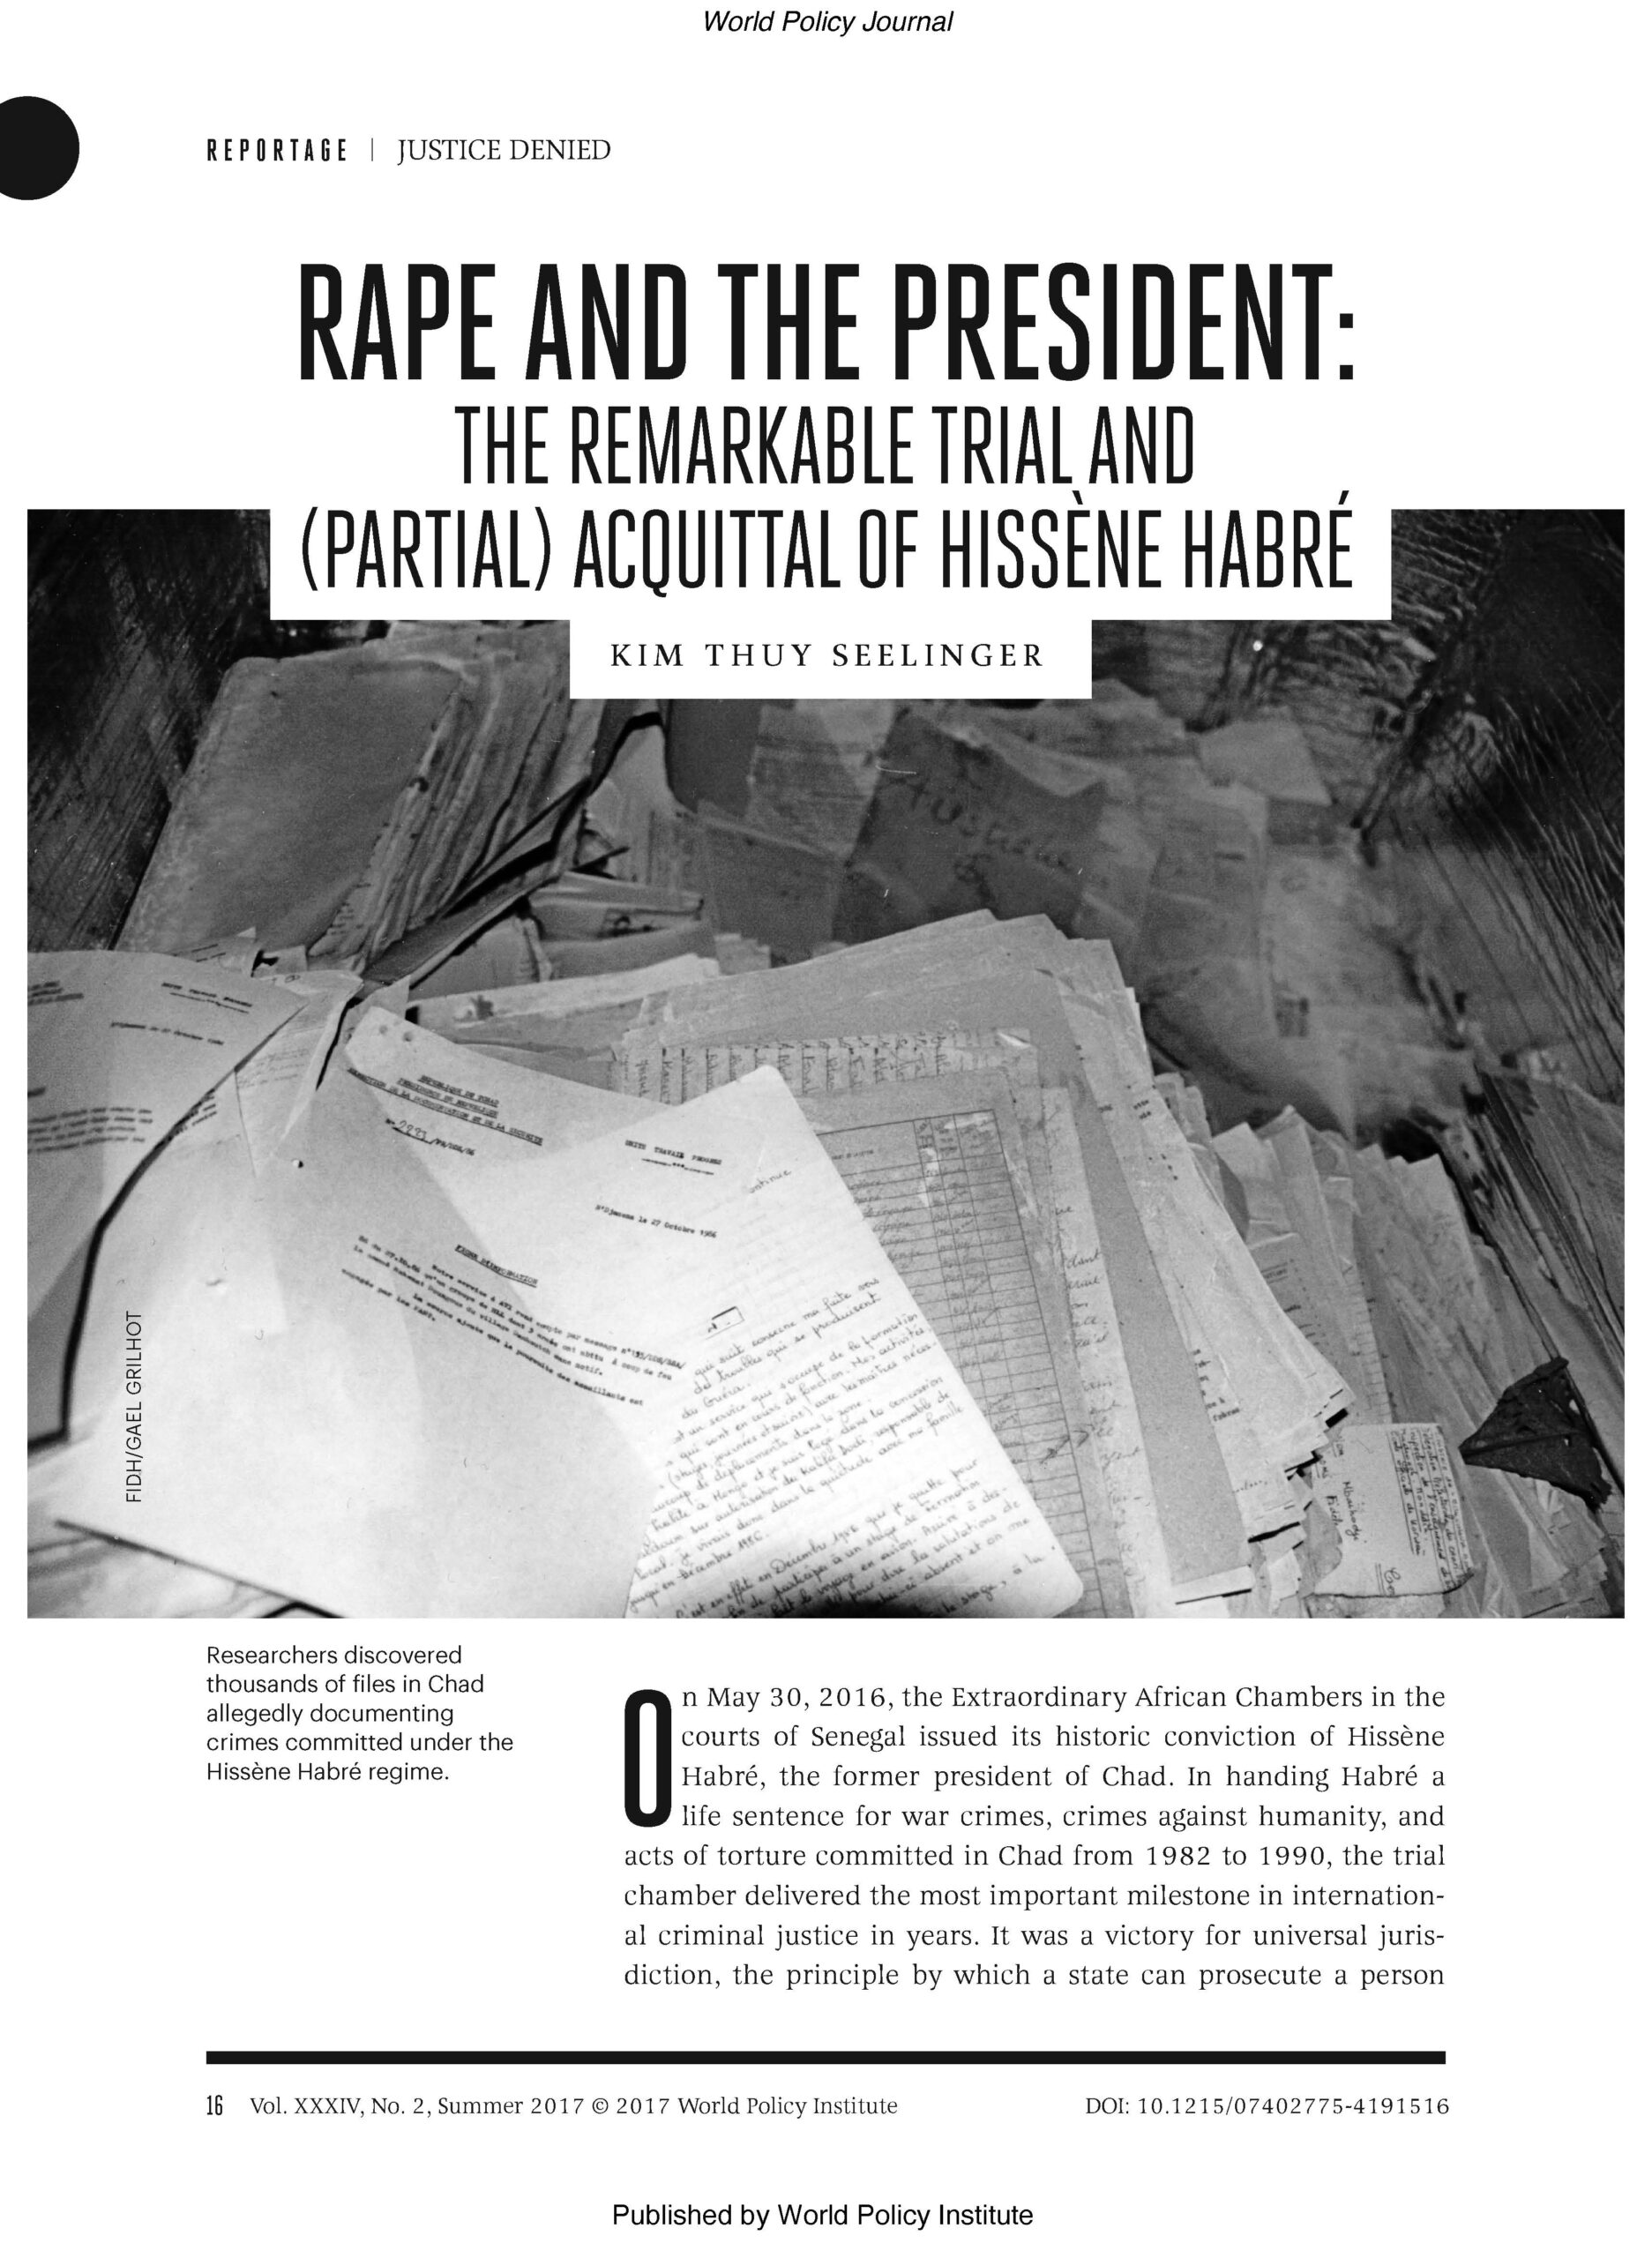 Cover page from Rape and The President- The remarkable trial and (partial) acquittal of Hissène Habré